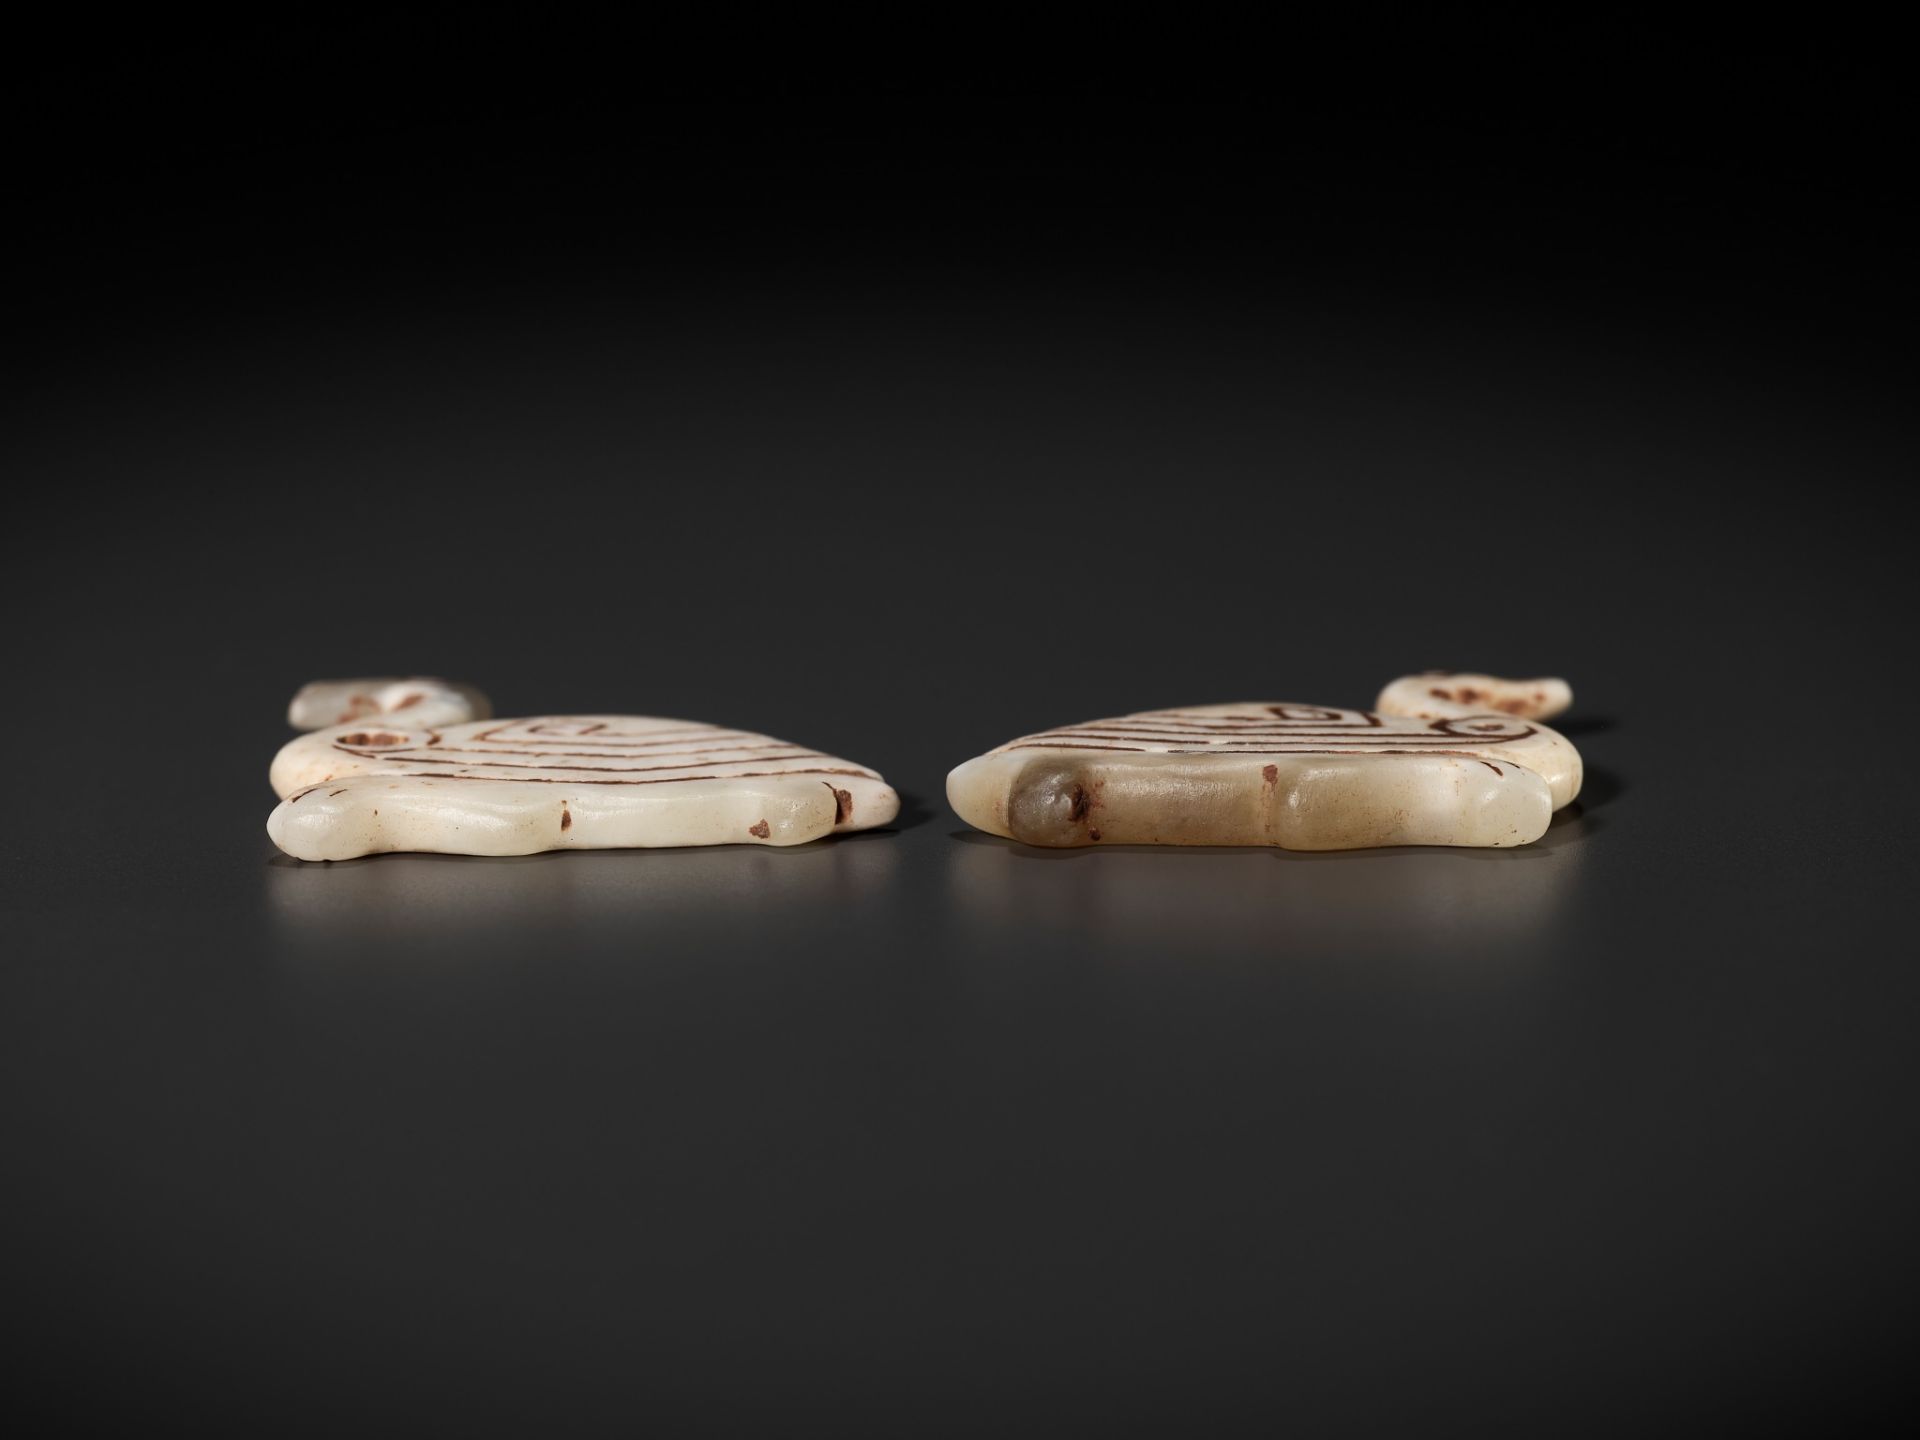 AN EXTREMELY RARE PAIR OF JADE 'GEESE' PENDANTS, SHANG DYNASTY - Image 10 of 12